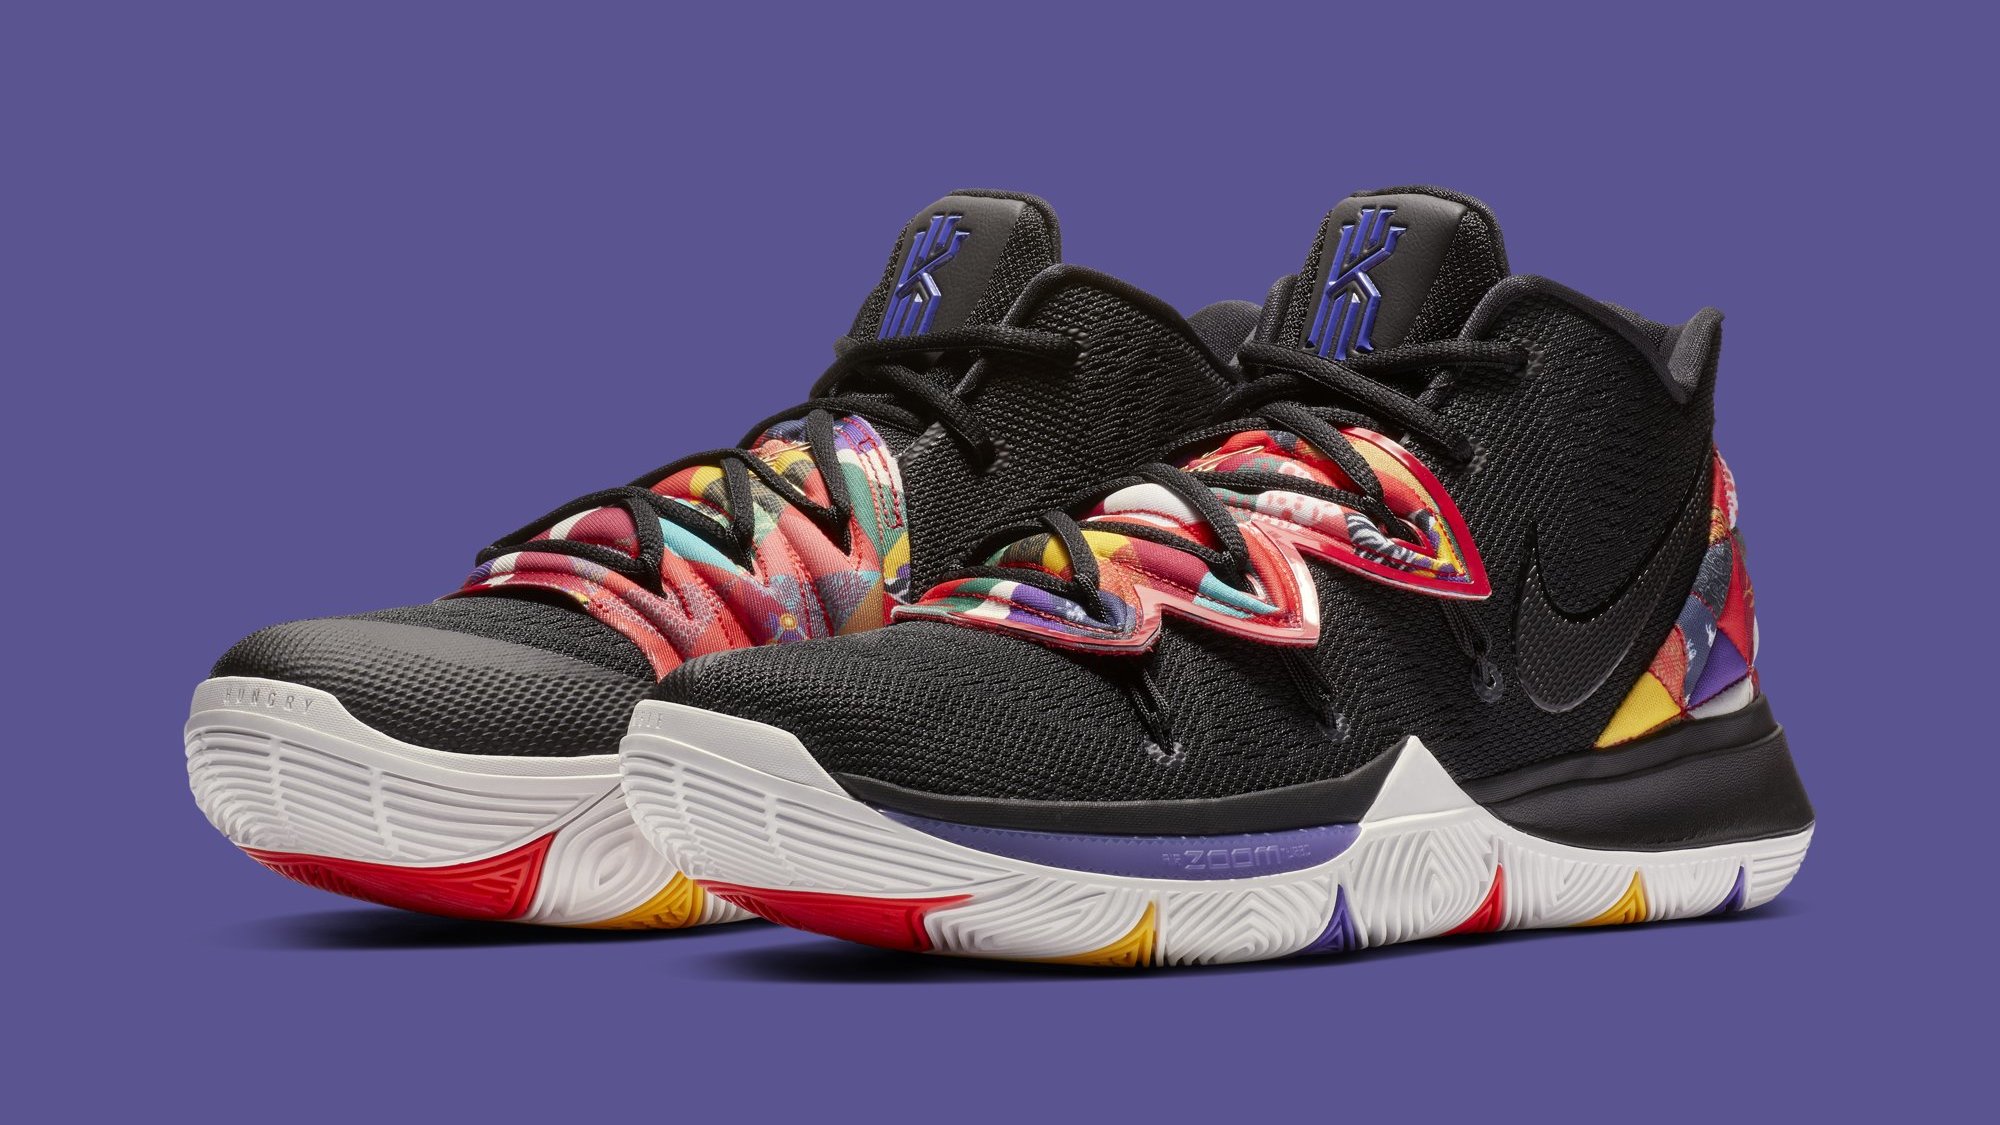 kyrie 5 limited edition